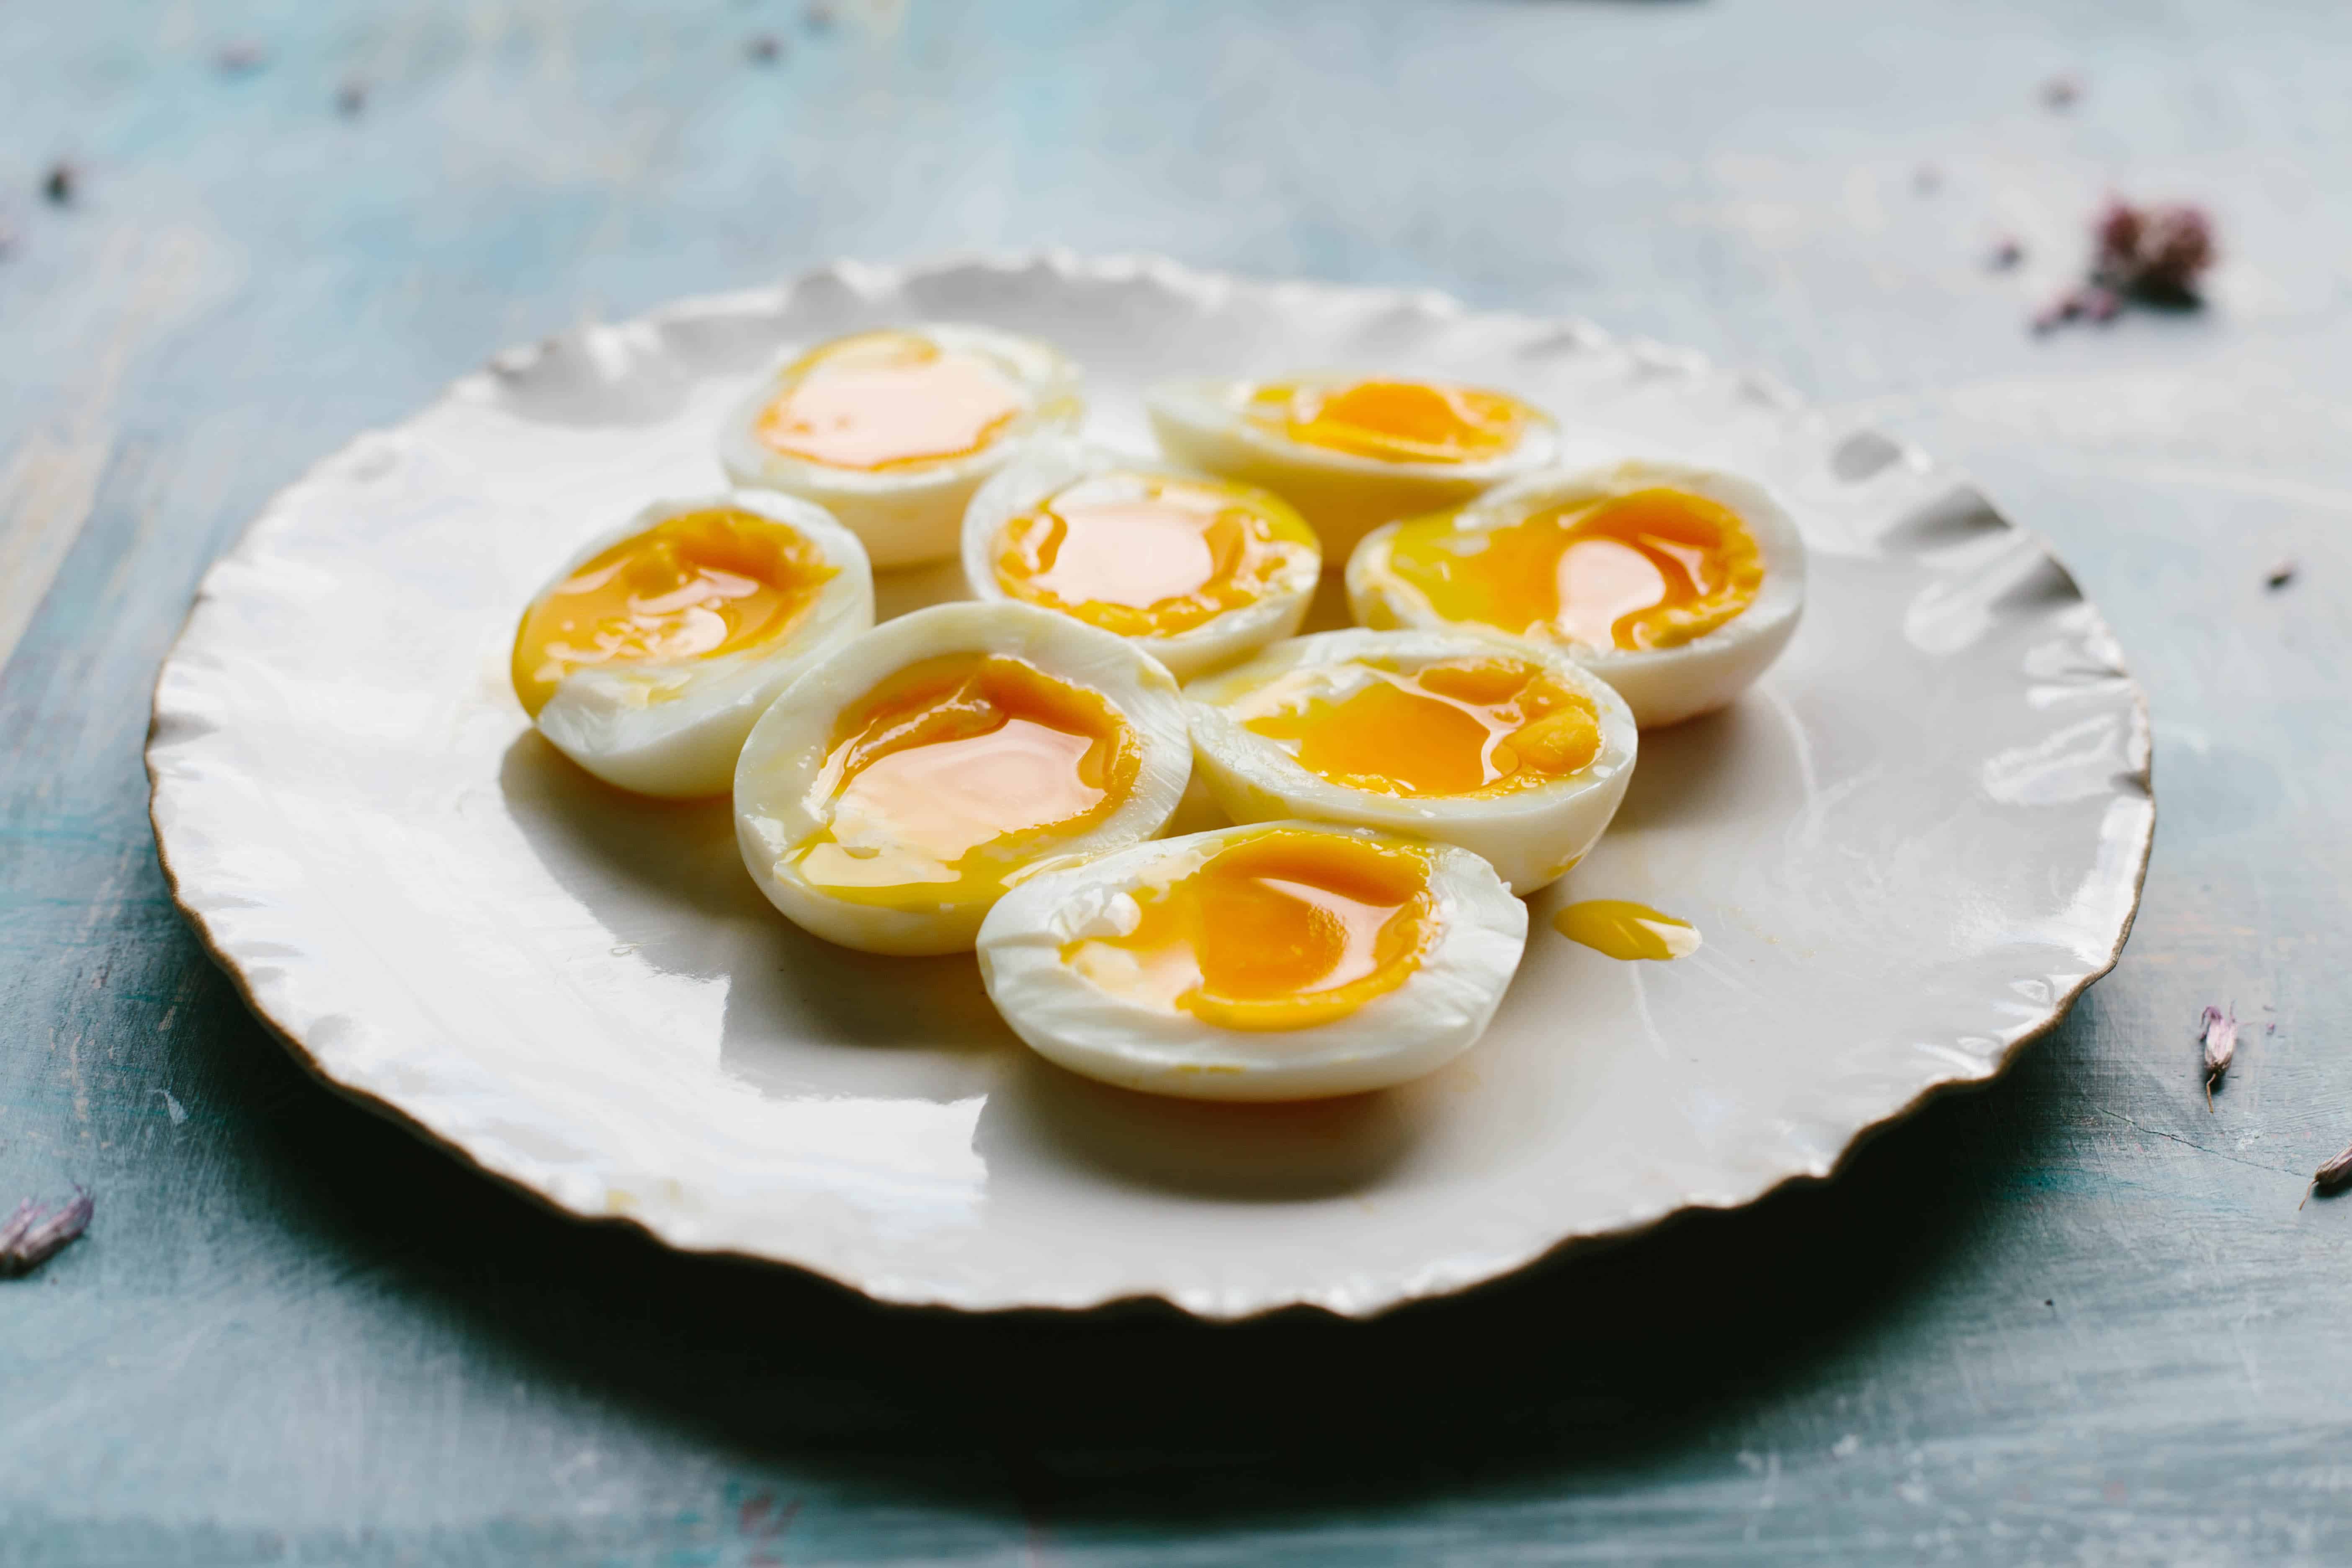 Eight soft boiled egg halves on a white plate.